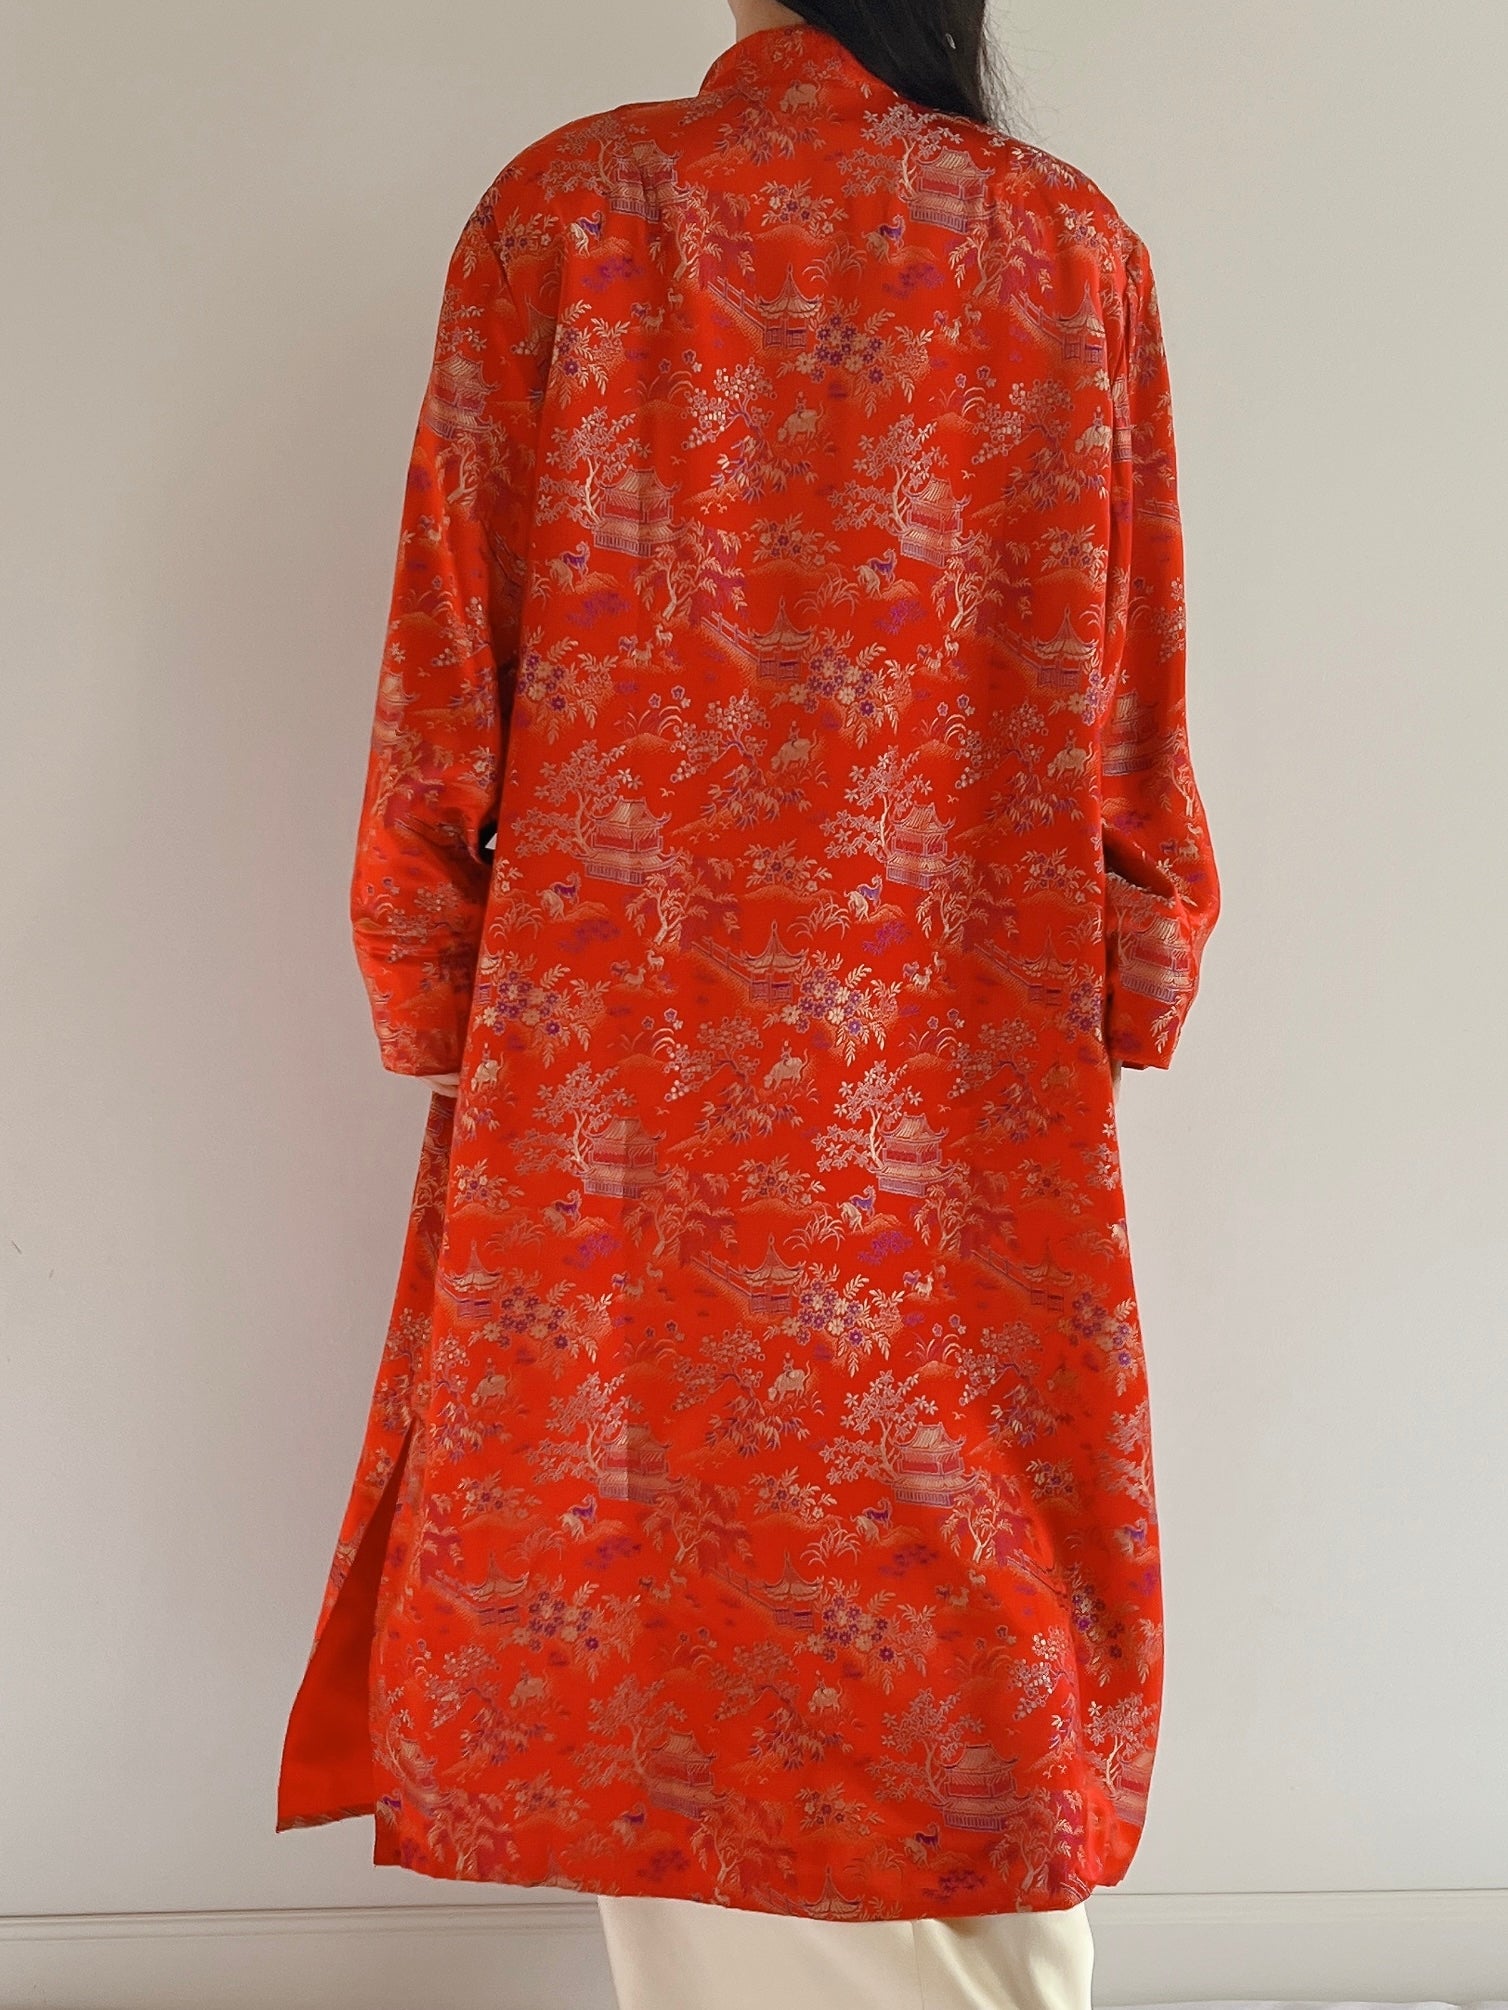 1960s Red Brocade Duster - M